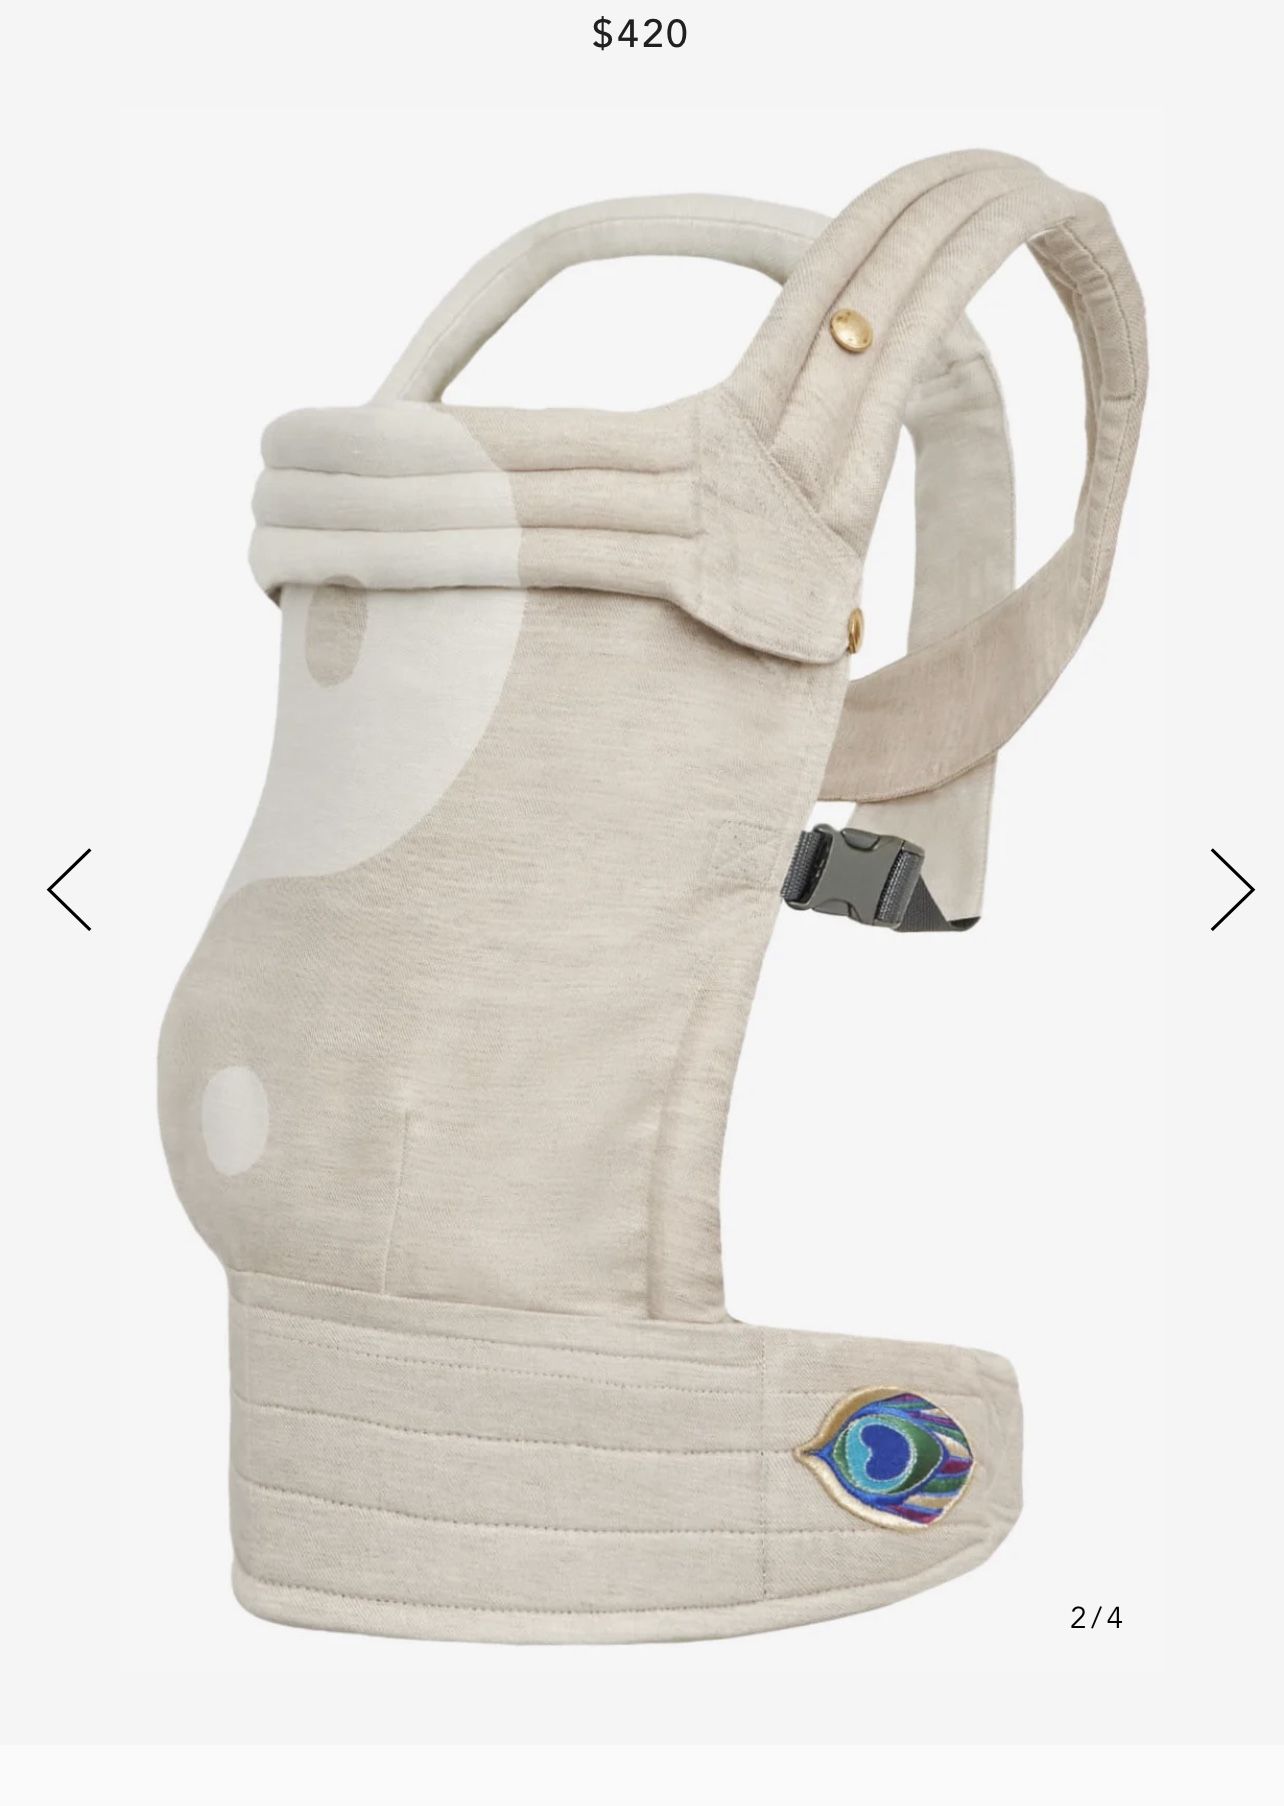 Artipoppe Luxury Baby Carrier 